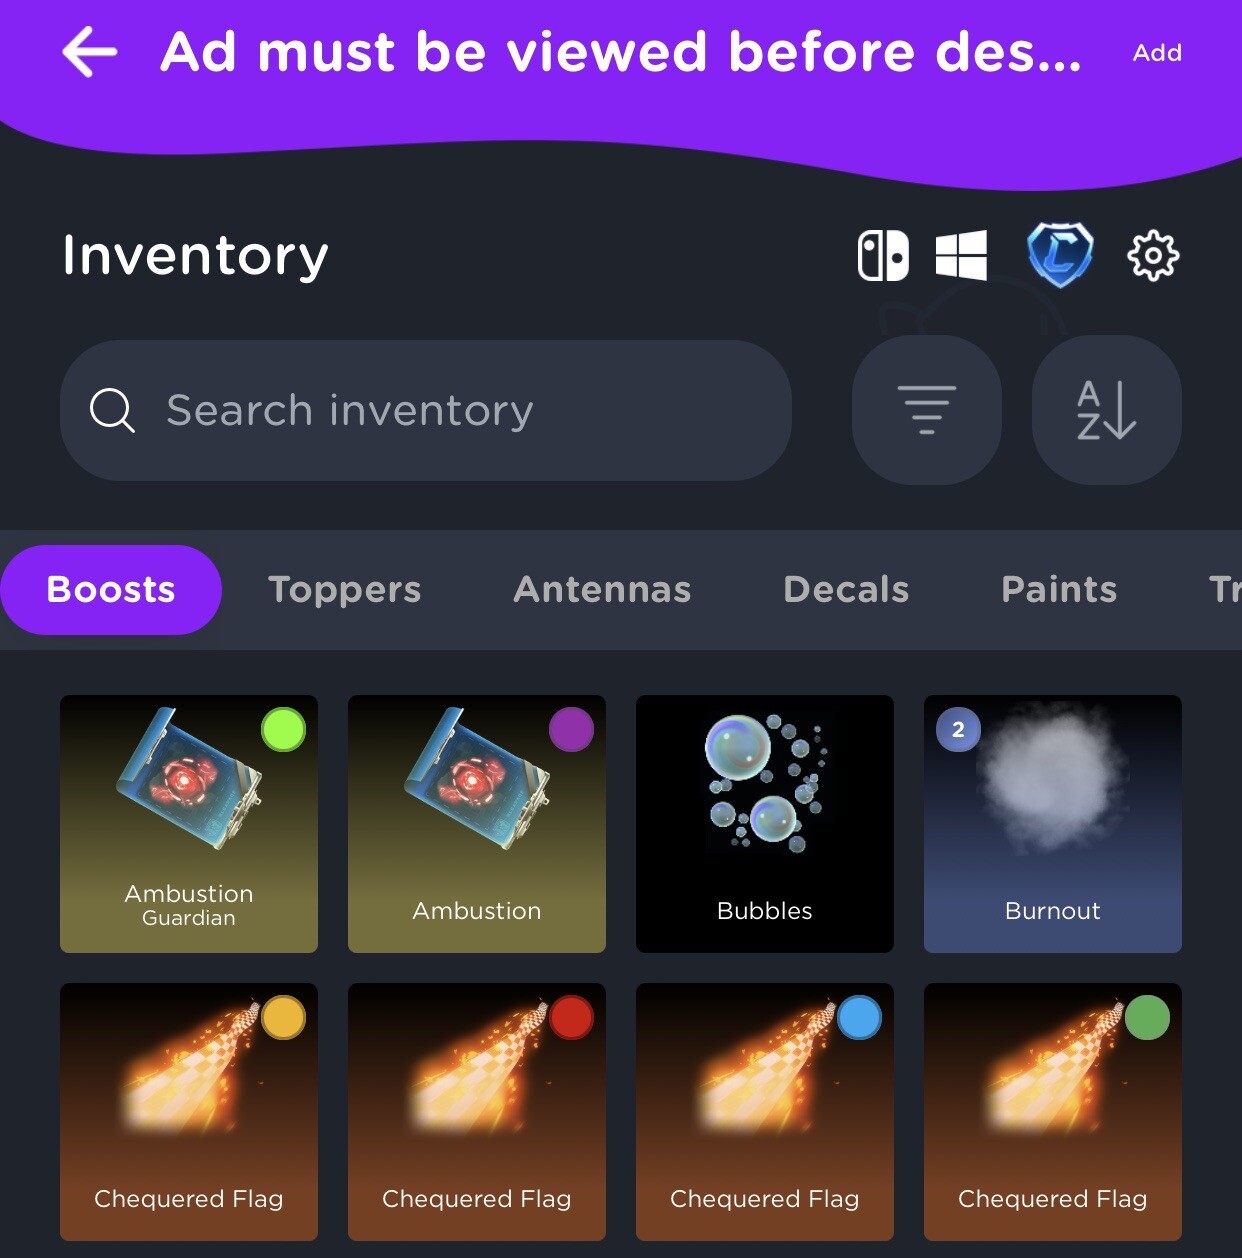 Inventory Title is off